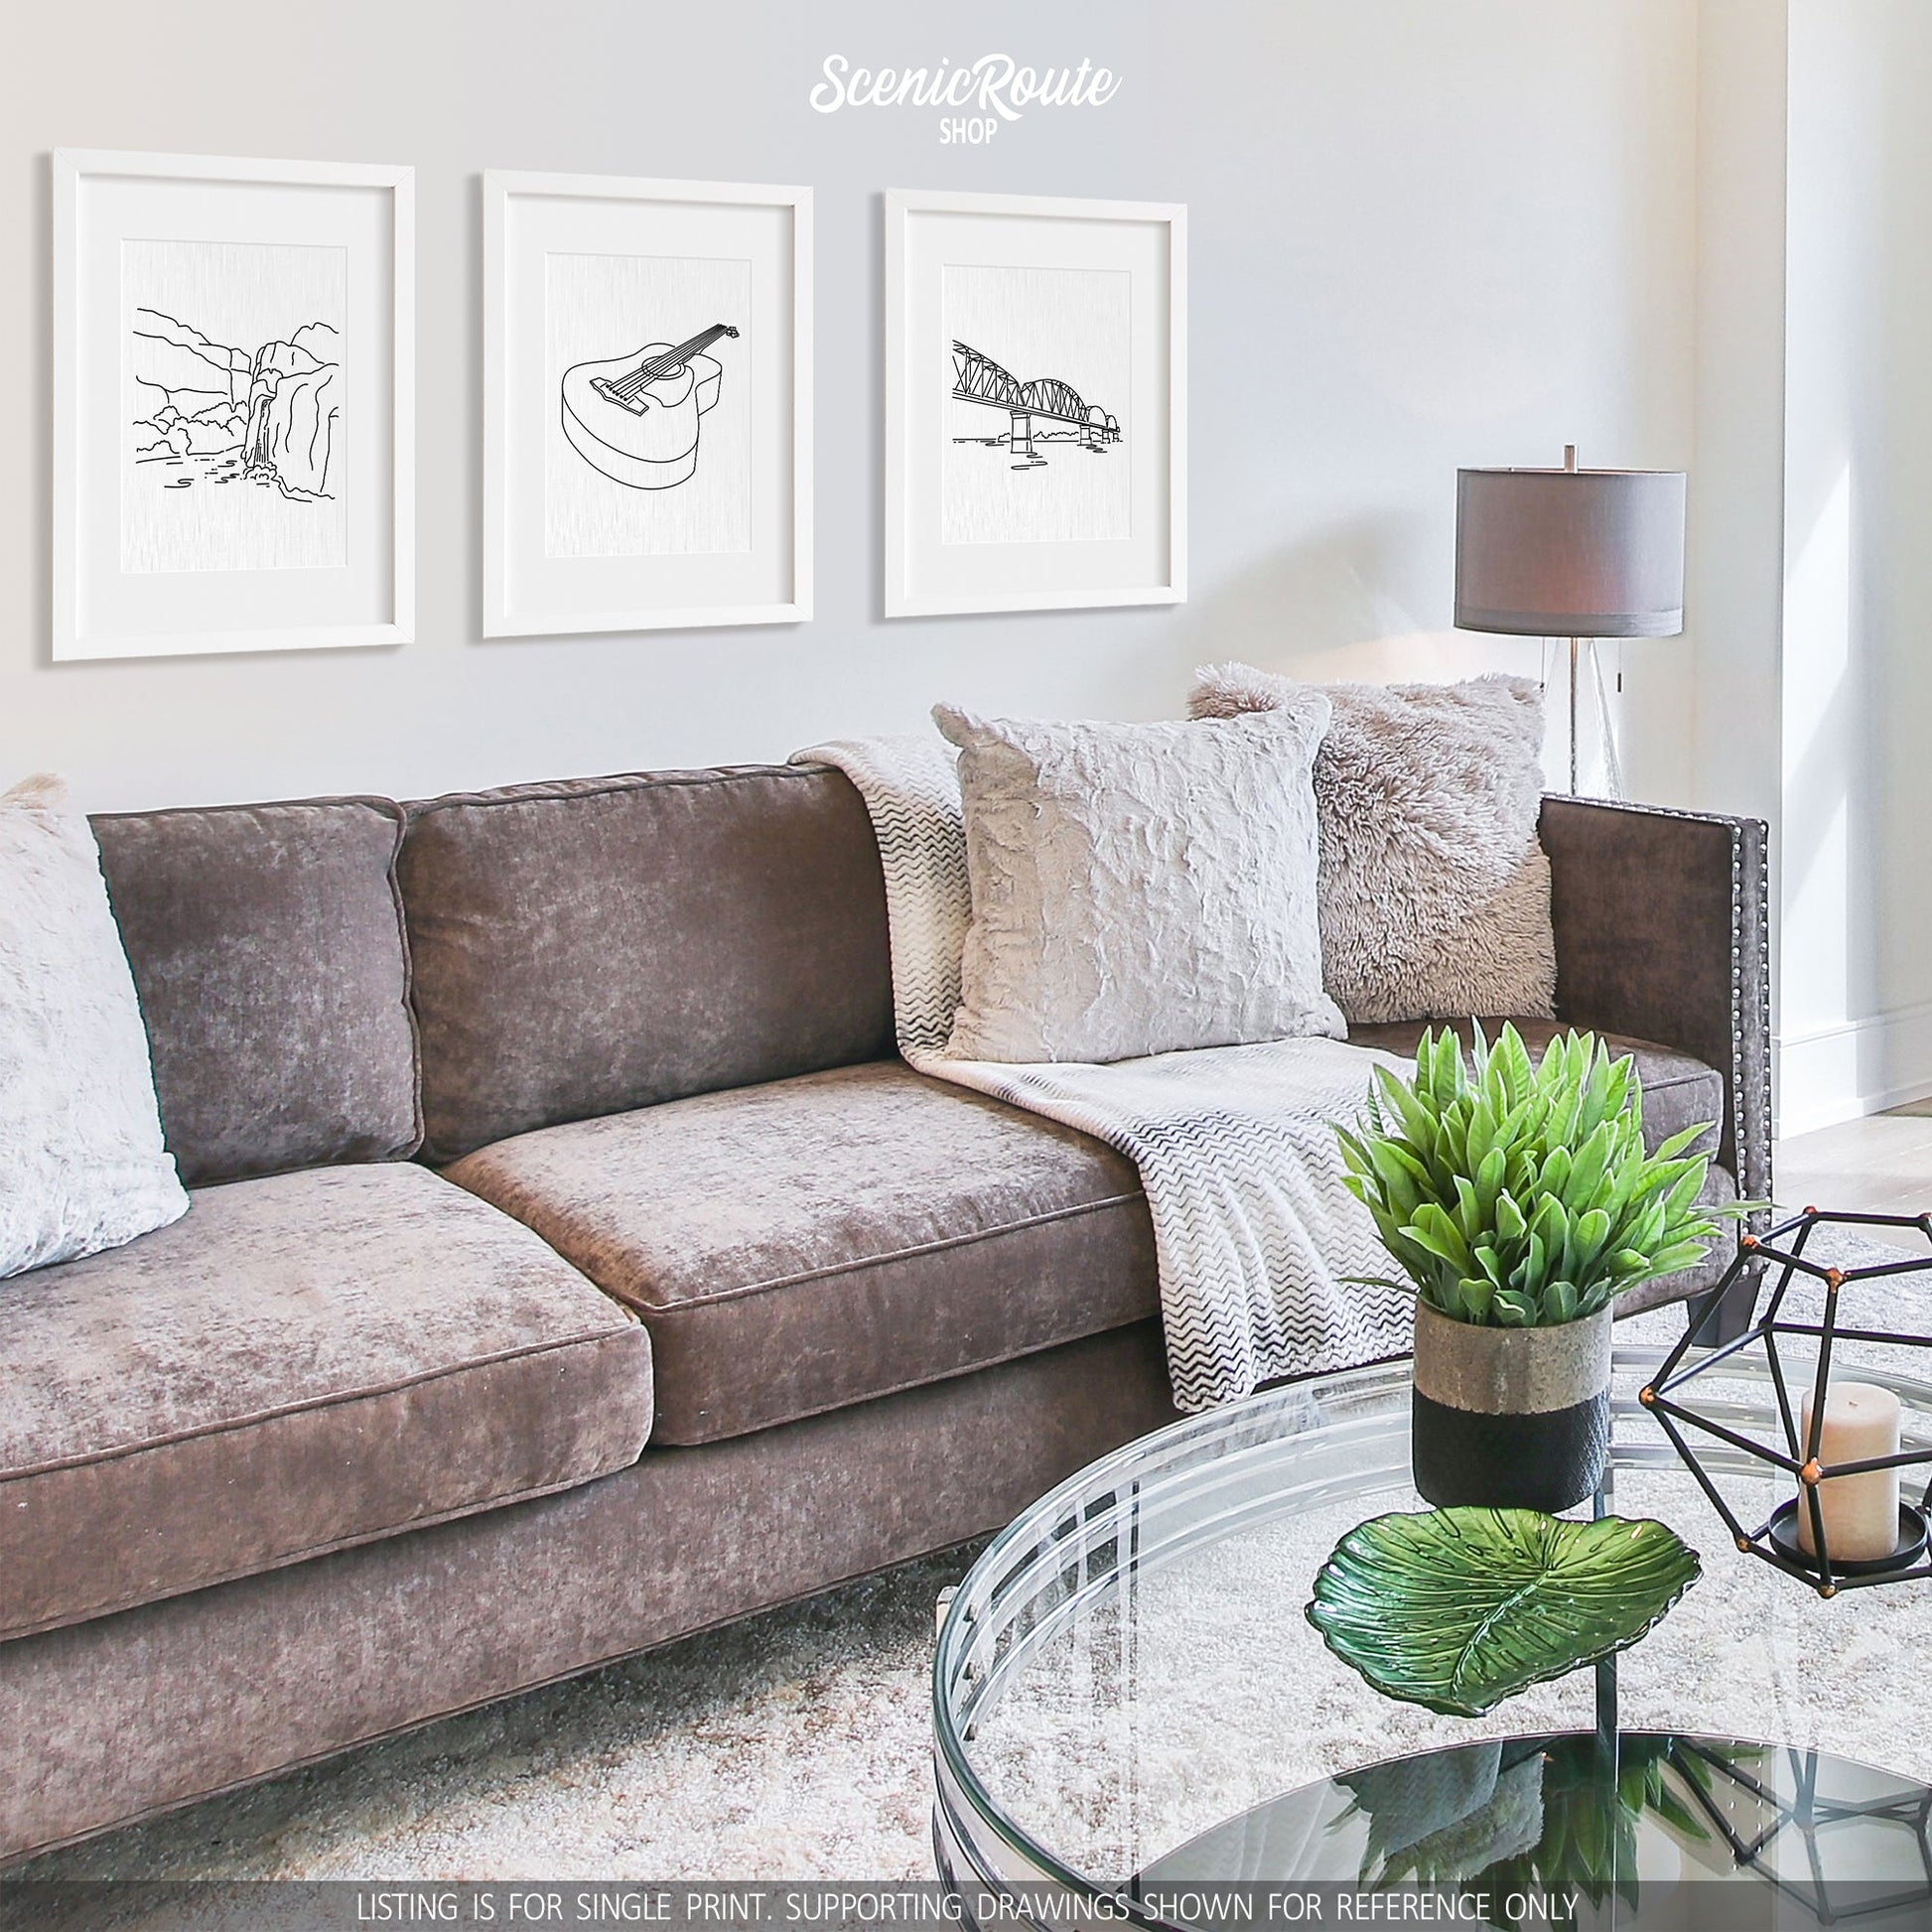 A group of three framed drawings on a white wall hanging above a couch with pillows and a blanket. The line art drawings include Havasu Falls, a Guitar, and the Big Four Bridge